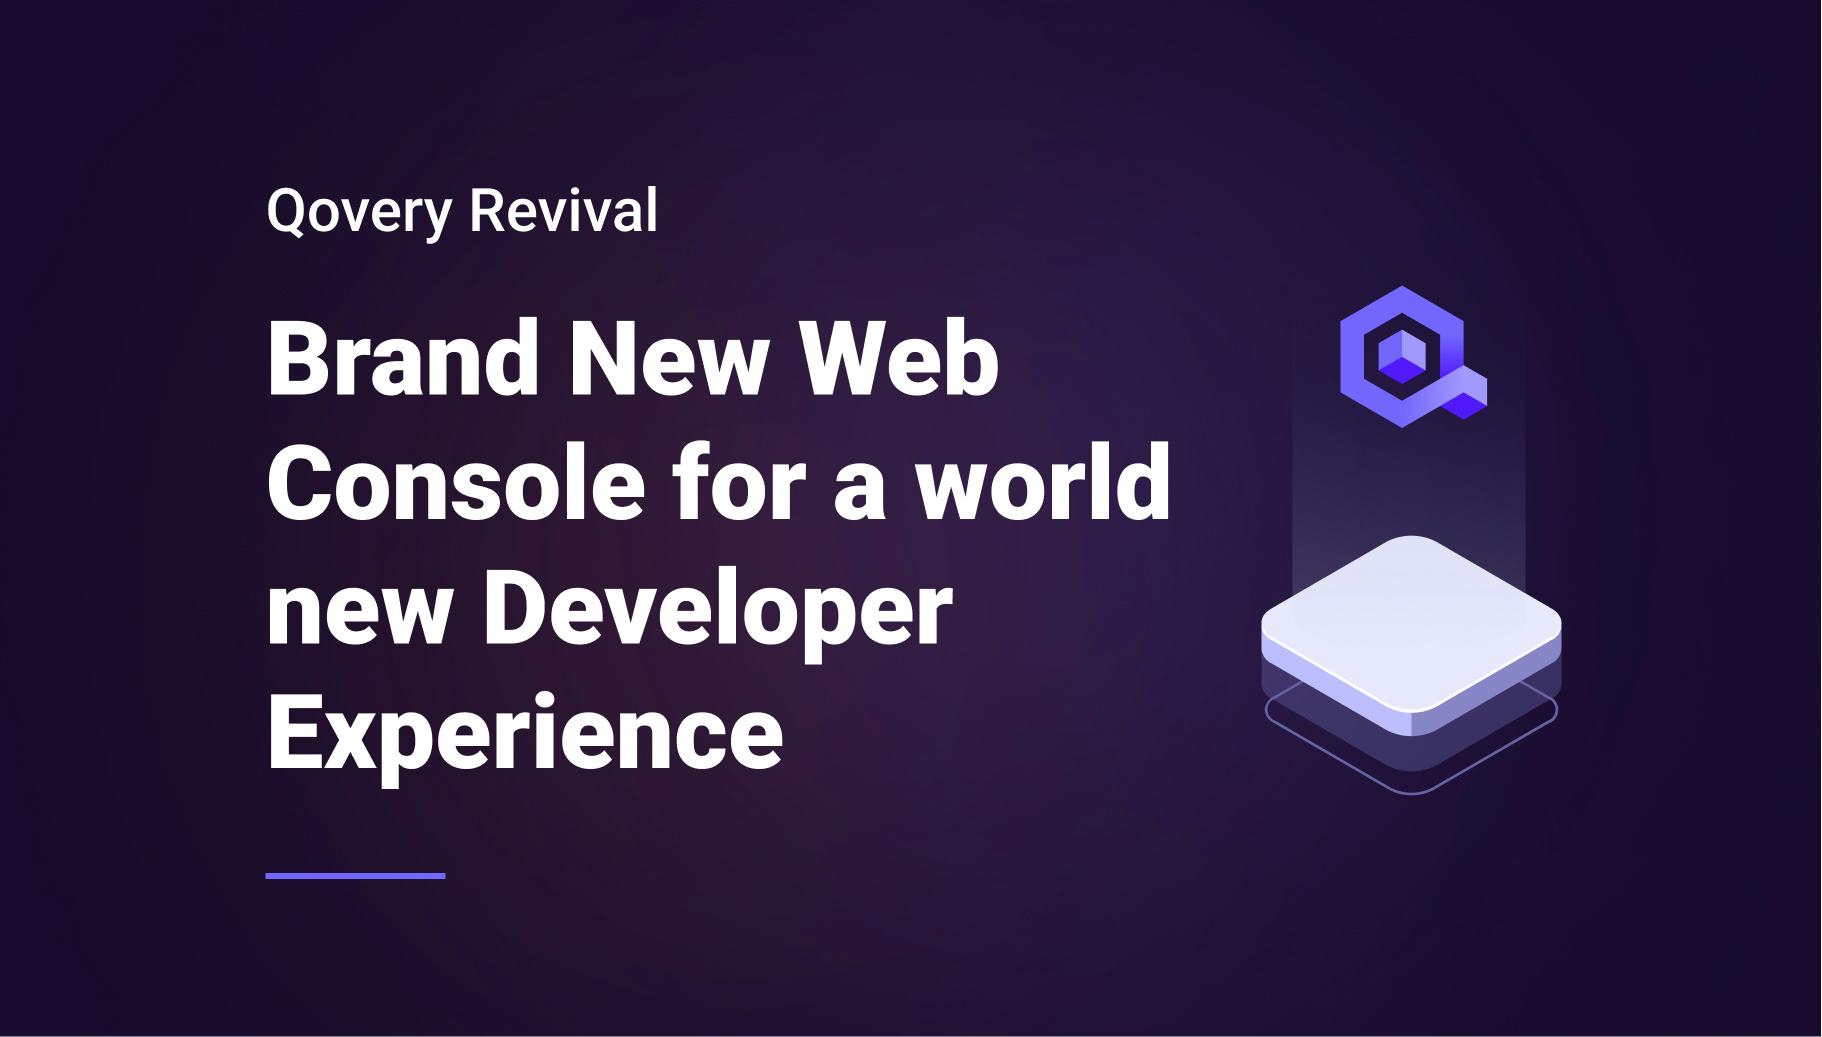 Qovery revival: Brand New Web Console for a world new Developer Experience - Qovery